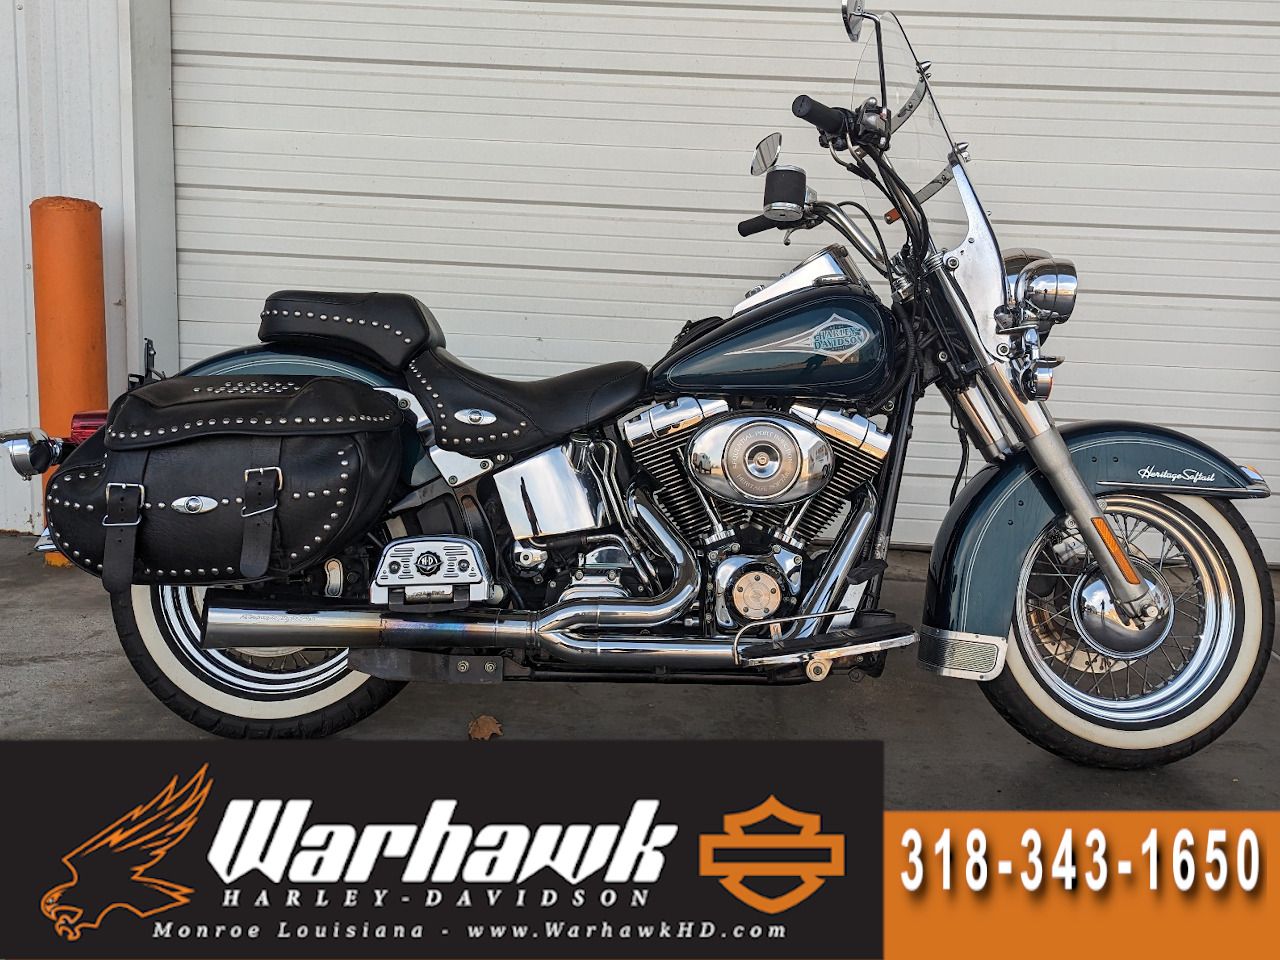 2001 heritage softail for sale near me - Photo 1